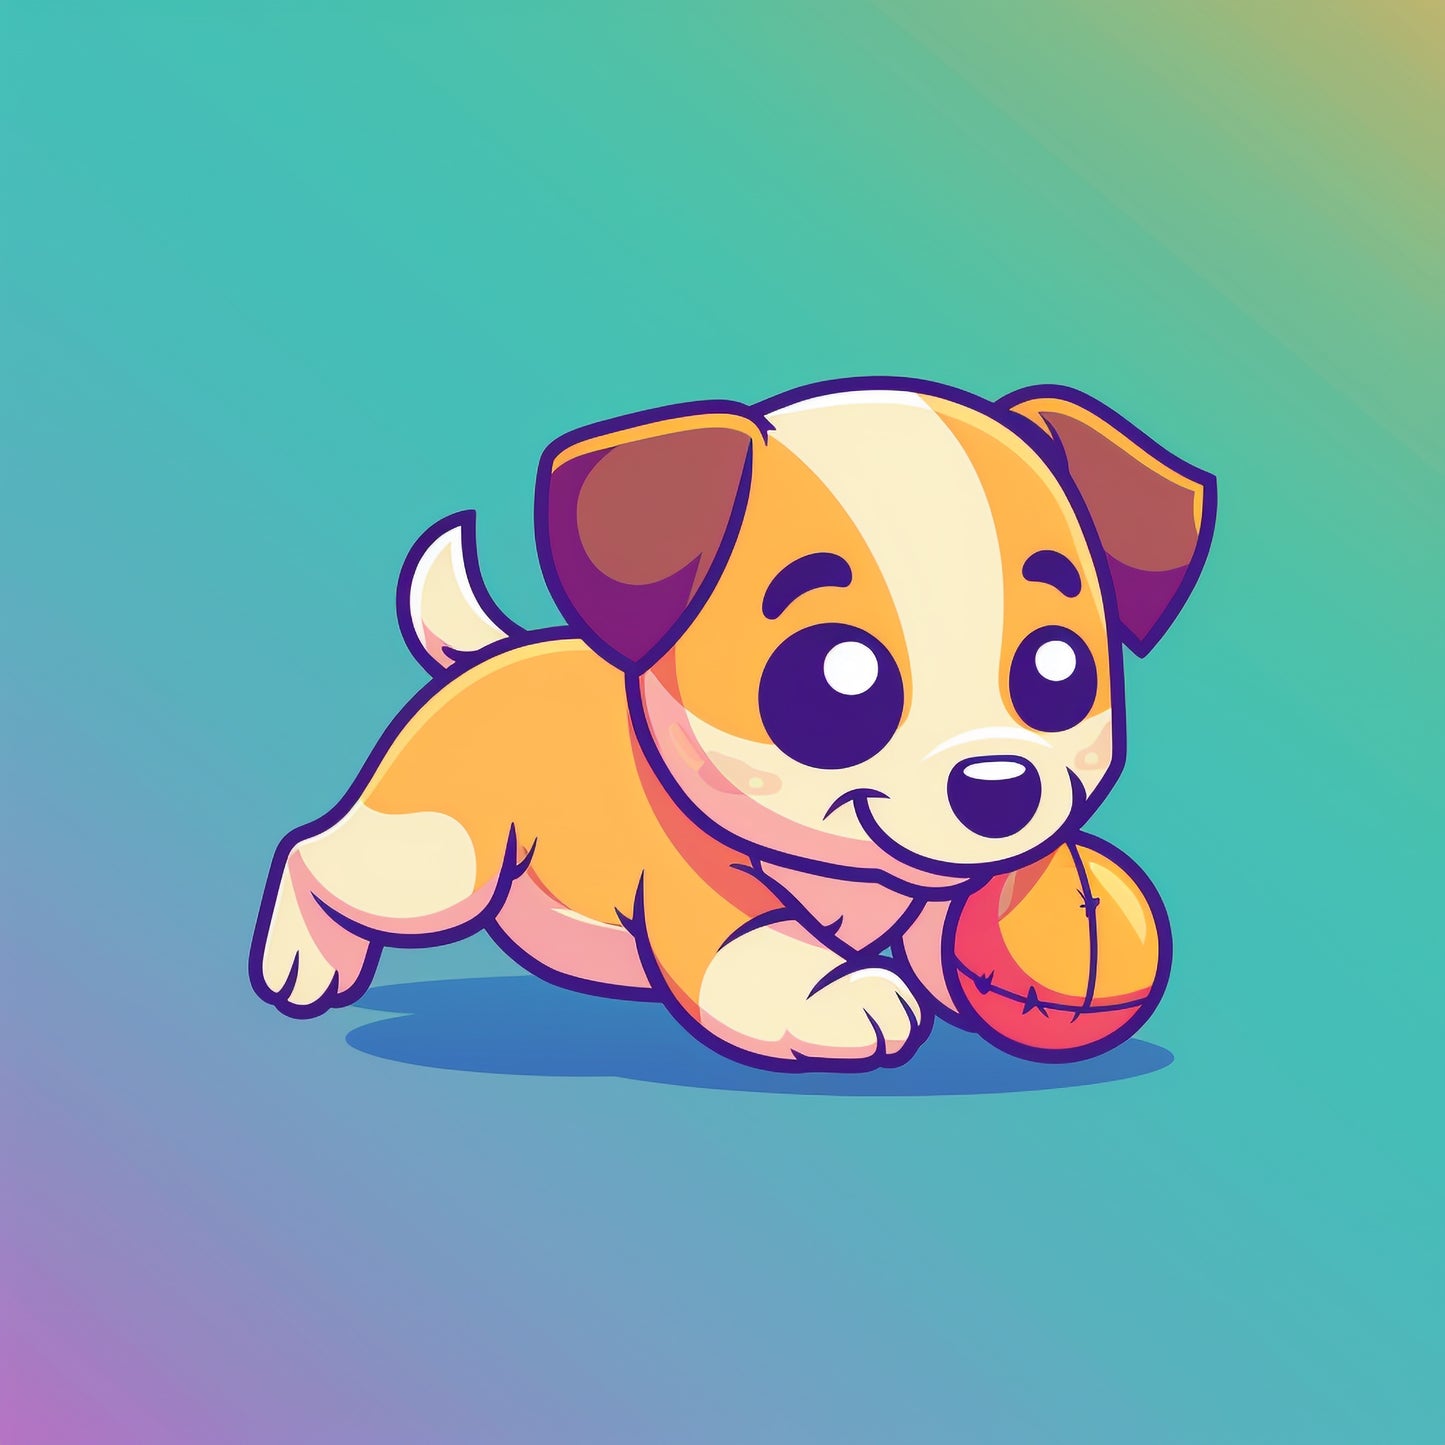 Adorable Puppy Playing with Ball on Colorful Background